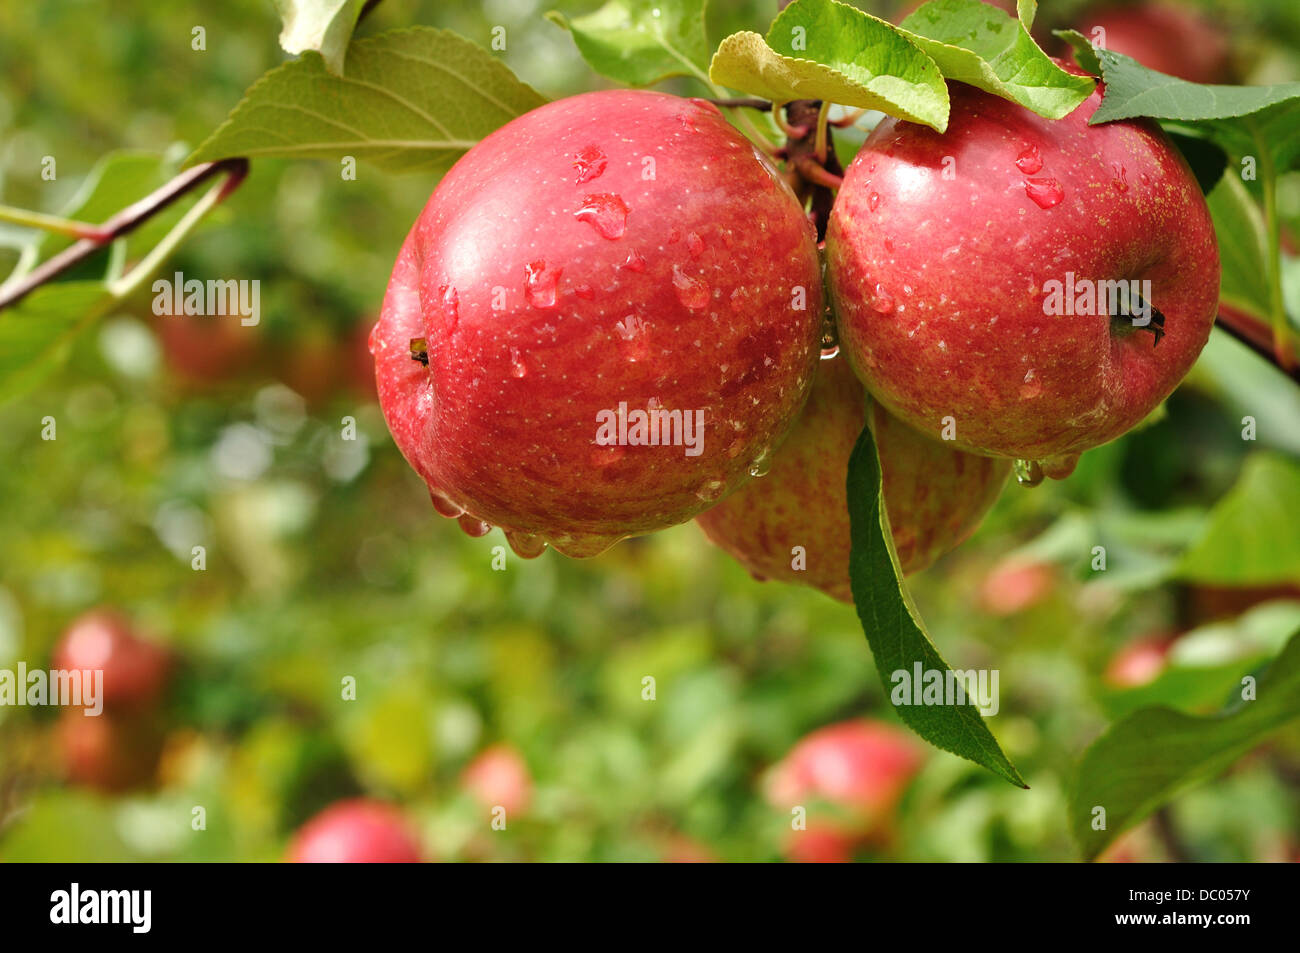 Red apples growing on an apple tree in an orchard Stock Photo